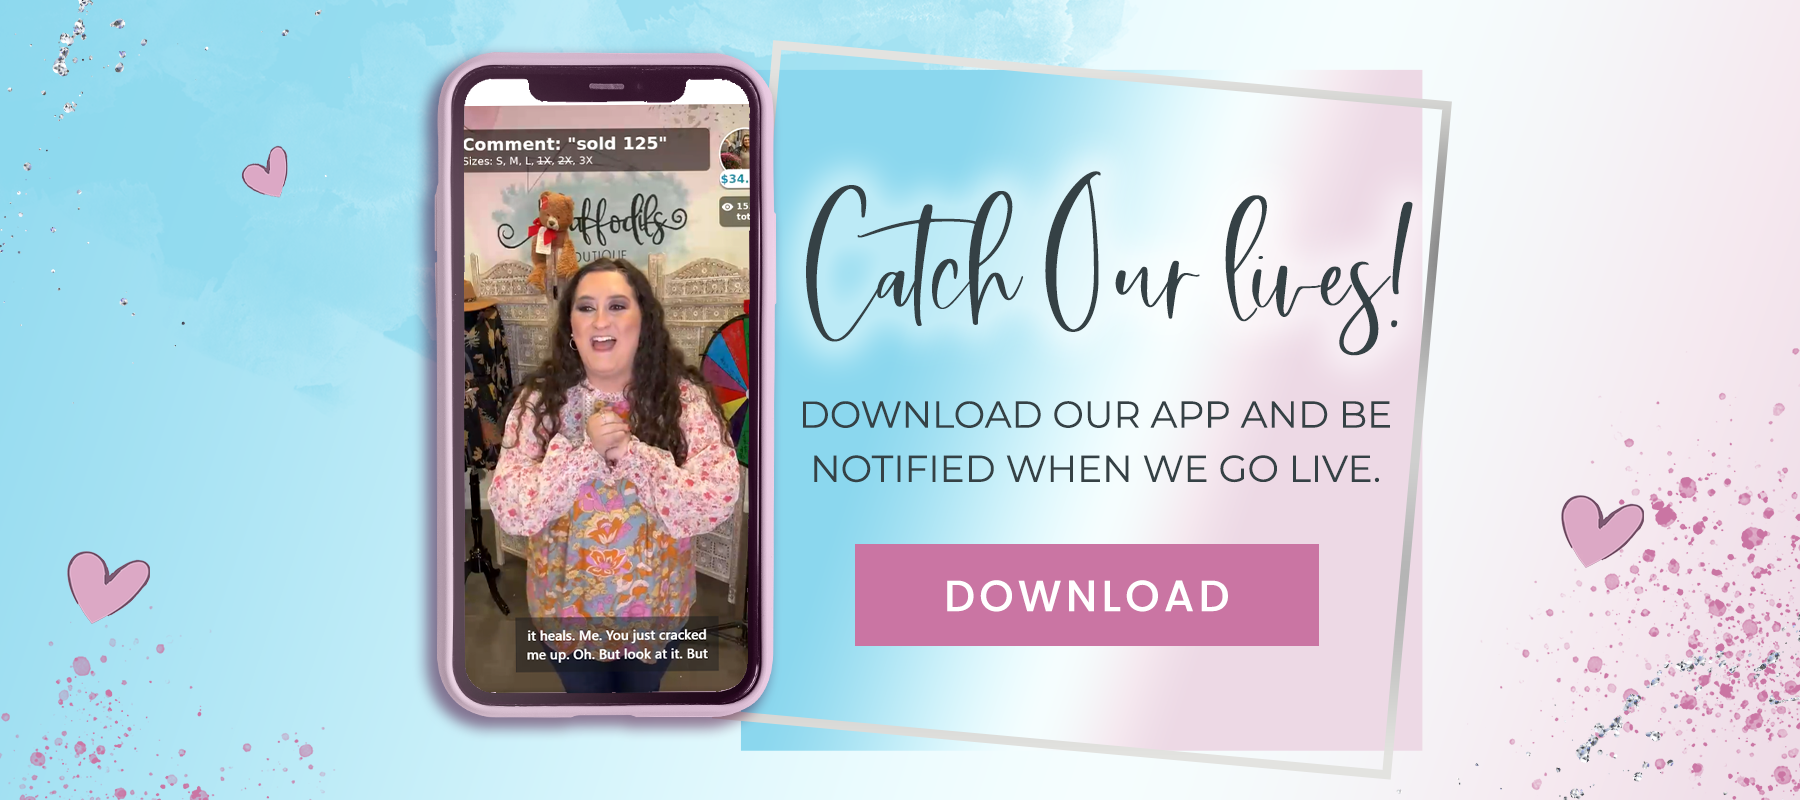 Catch our lives! Download our app and be notified when we go live